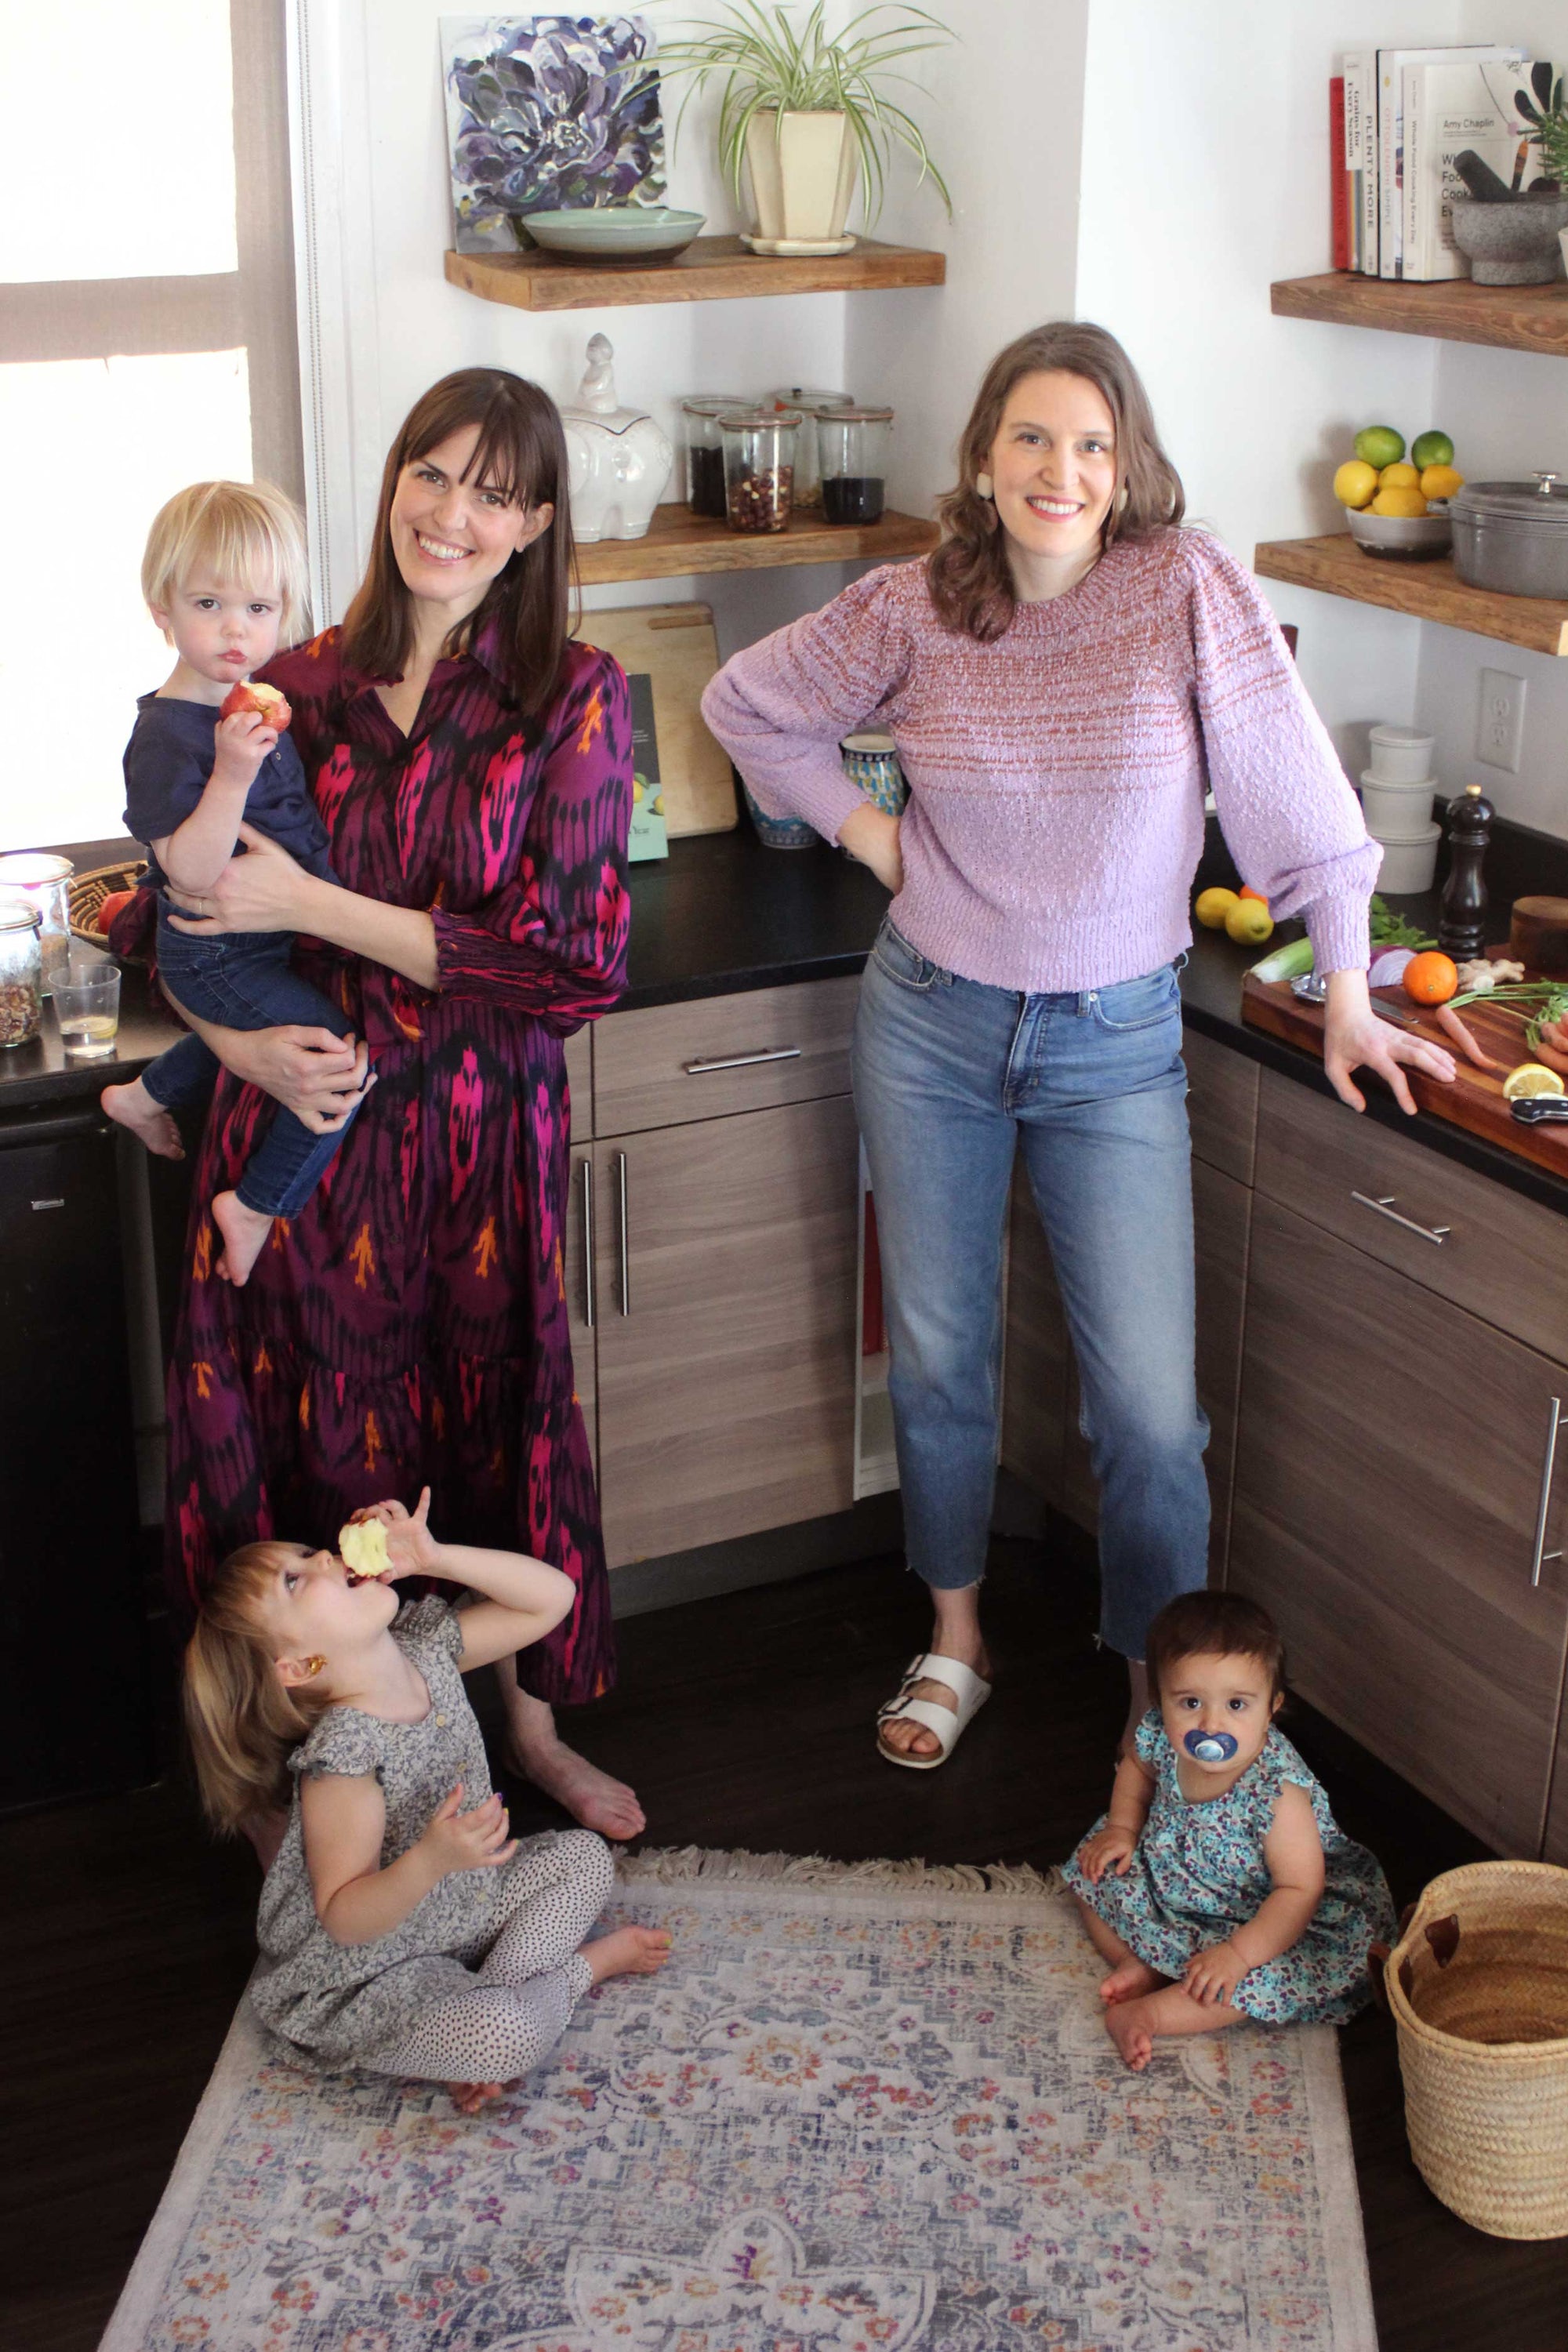 Founders Kathryn and Sarah stand in a kitchen with their three small children on the floor and in their arms. They are both tall and Caucasian with brown hair. Sarah is on the left wearing a ikat print dress Kathryn wears boyfriend jeans and a lavender sweater. She has one hand on her hip and one hand on the counter. In the background are grey-stained natural wood cabinets and stone countertops with open shelving that features cookbooks, bowls of citrus fruits, jars of beans, and a floral oil painting.